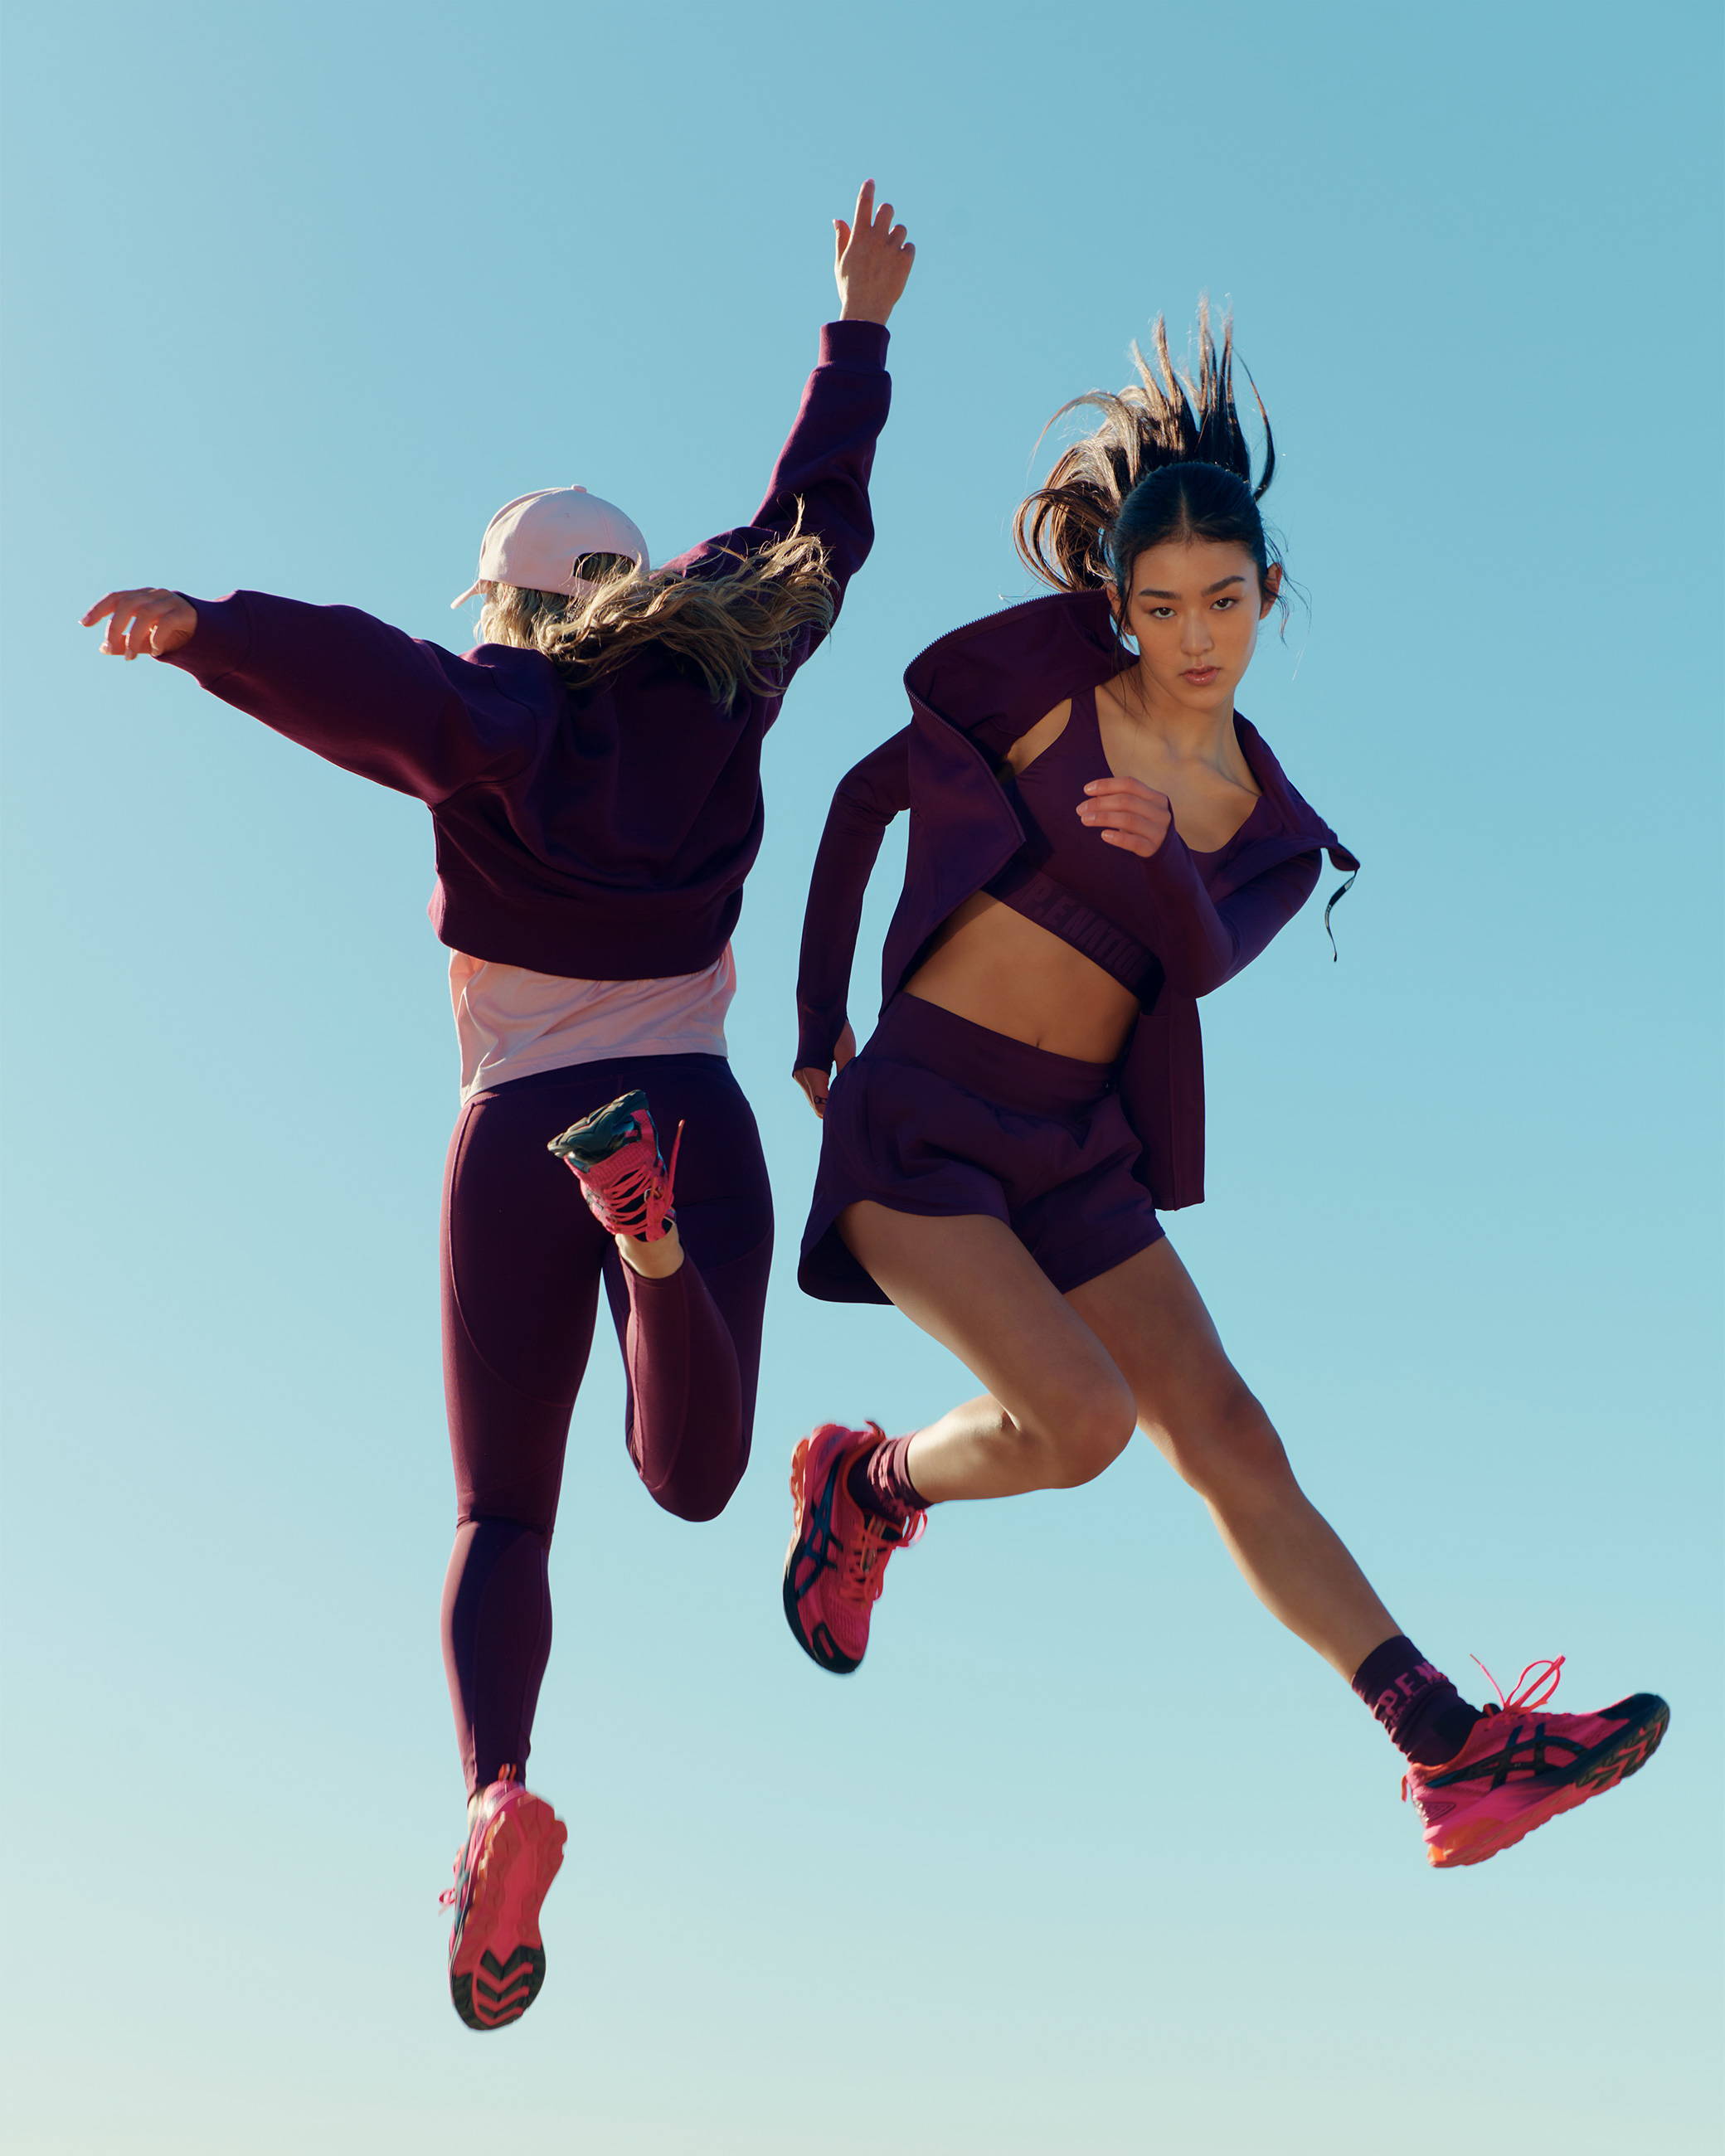 Two girls jump in the air wearing a range of hiking clothes including shorts, leggings and jackets